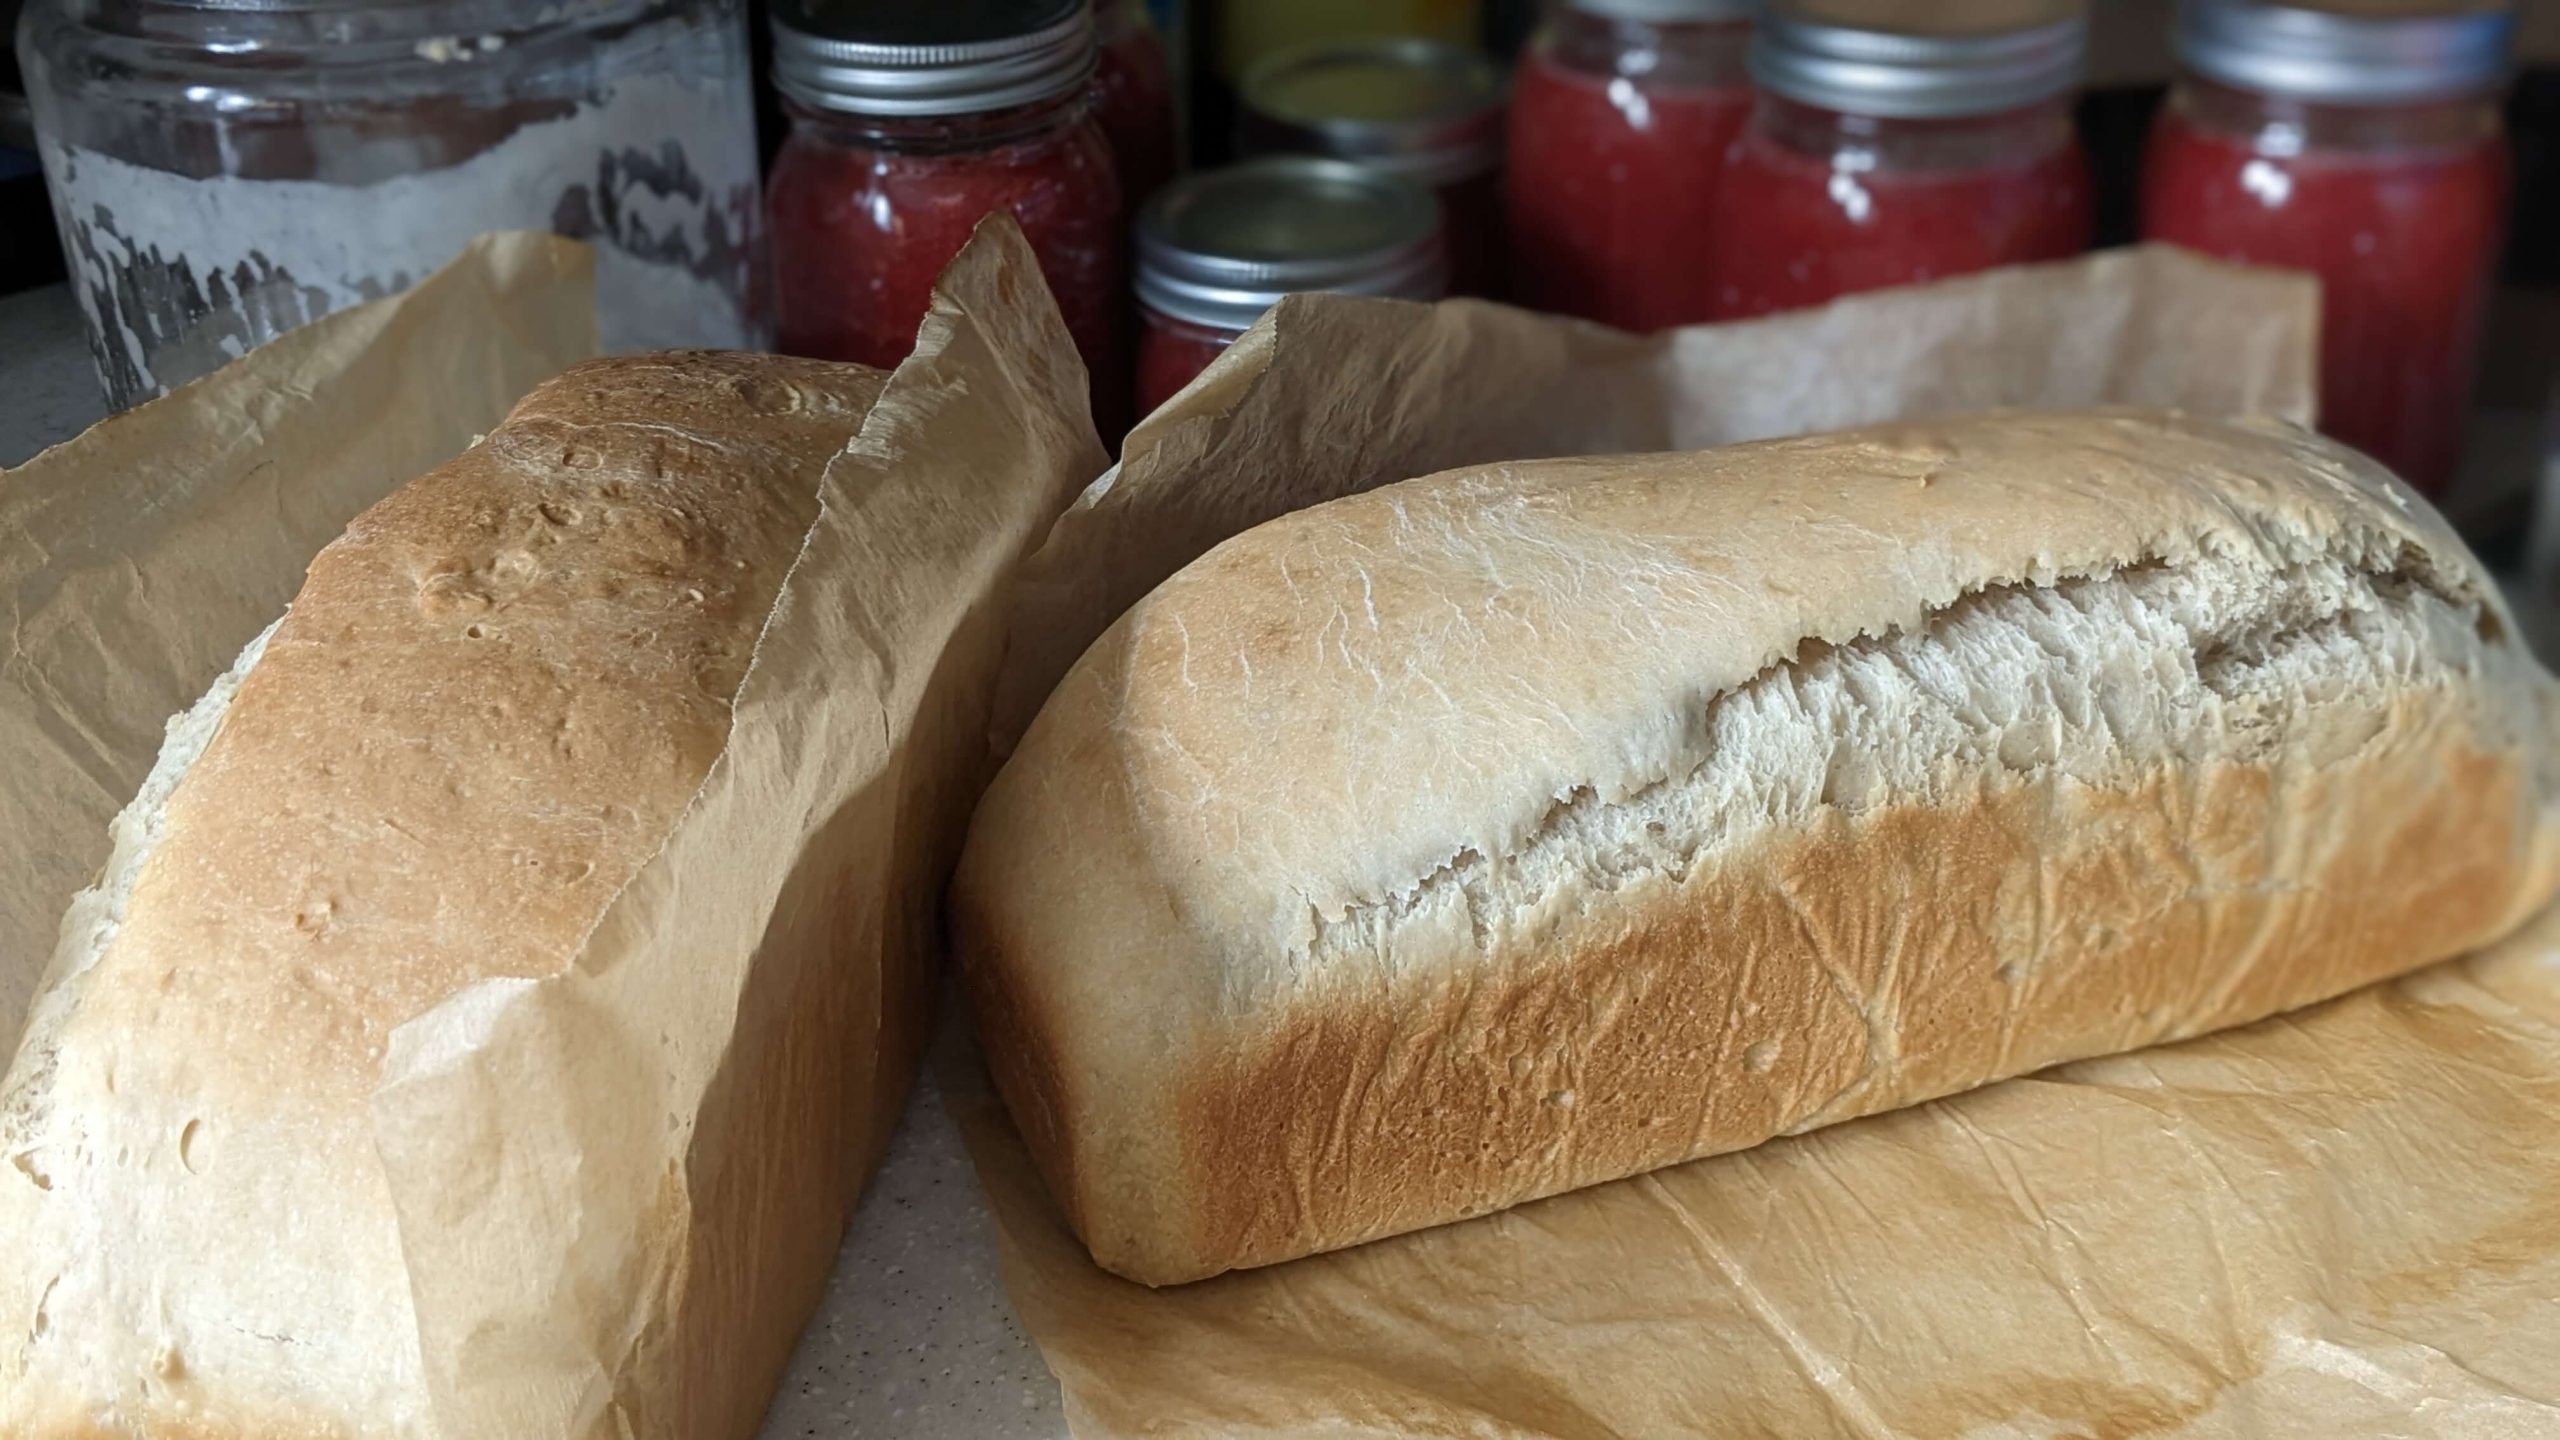 two loaves of sourdough sandwich bread on parchment paper in front of canned jelly